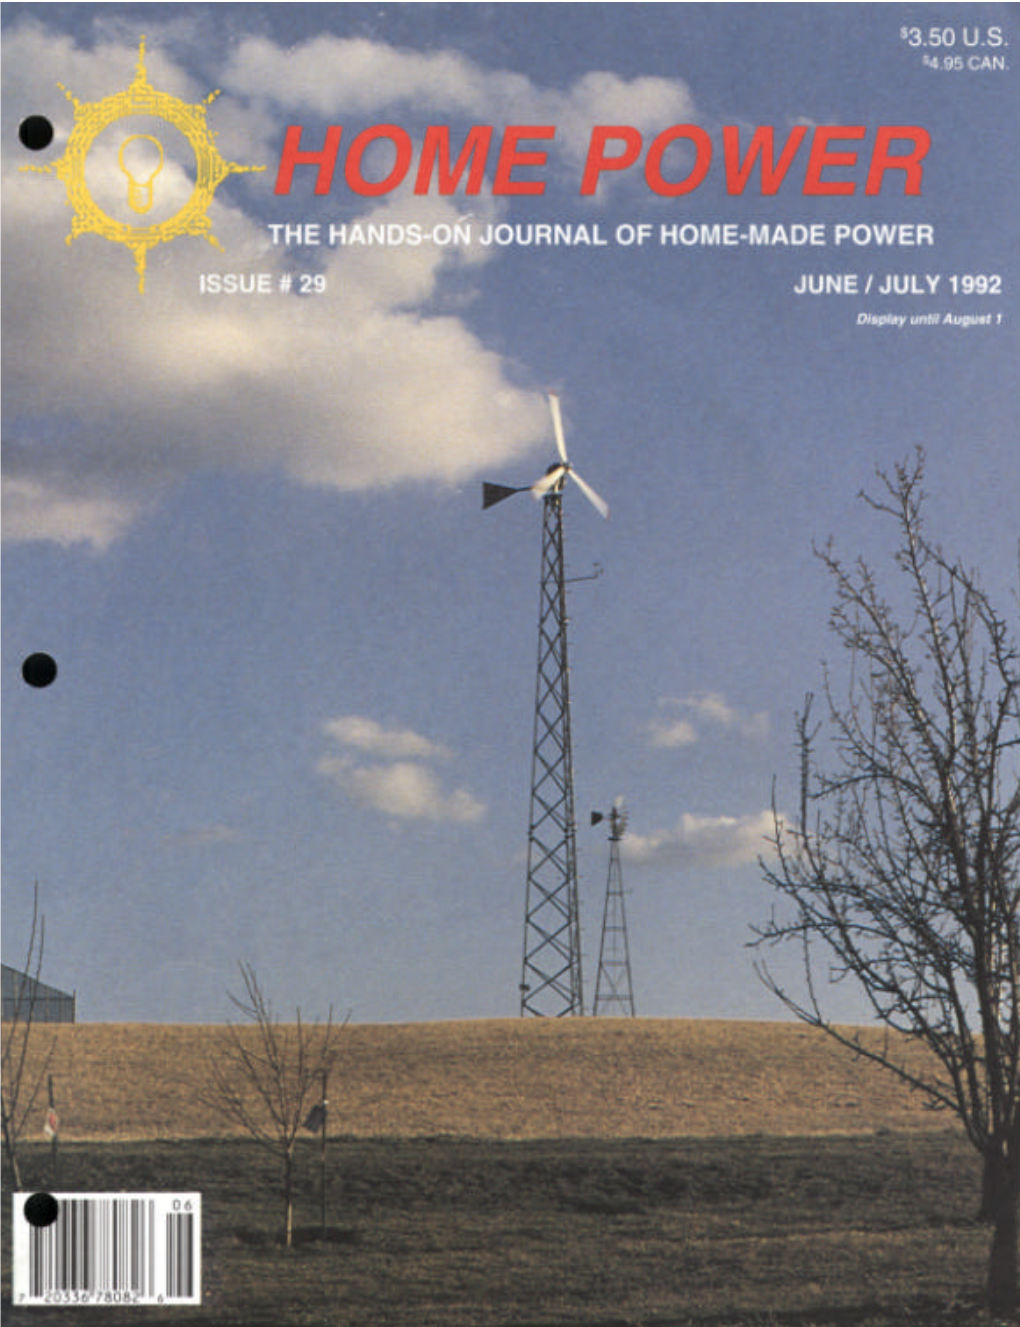 Home Power #29 ¥ June / July 1992 HOME POWER